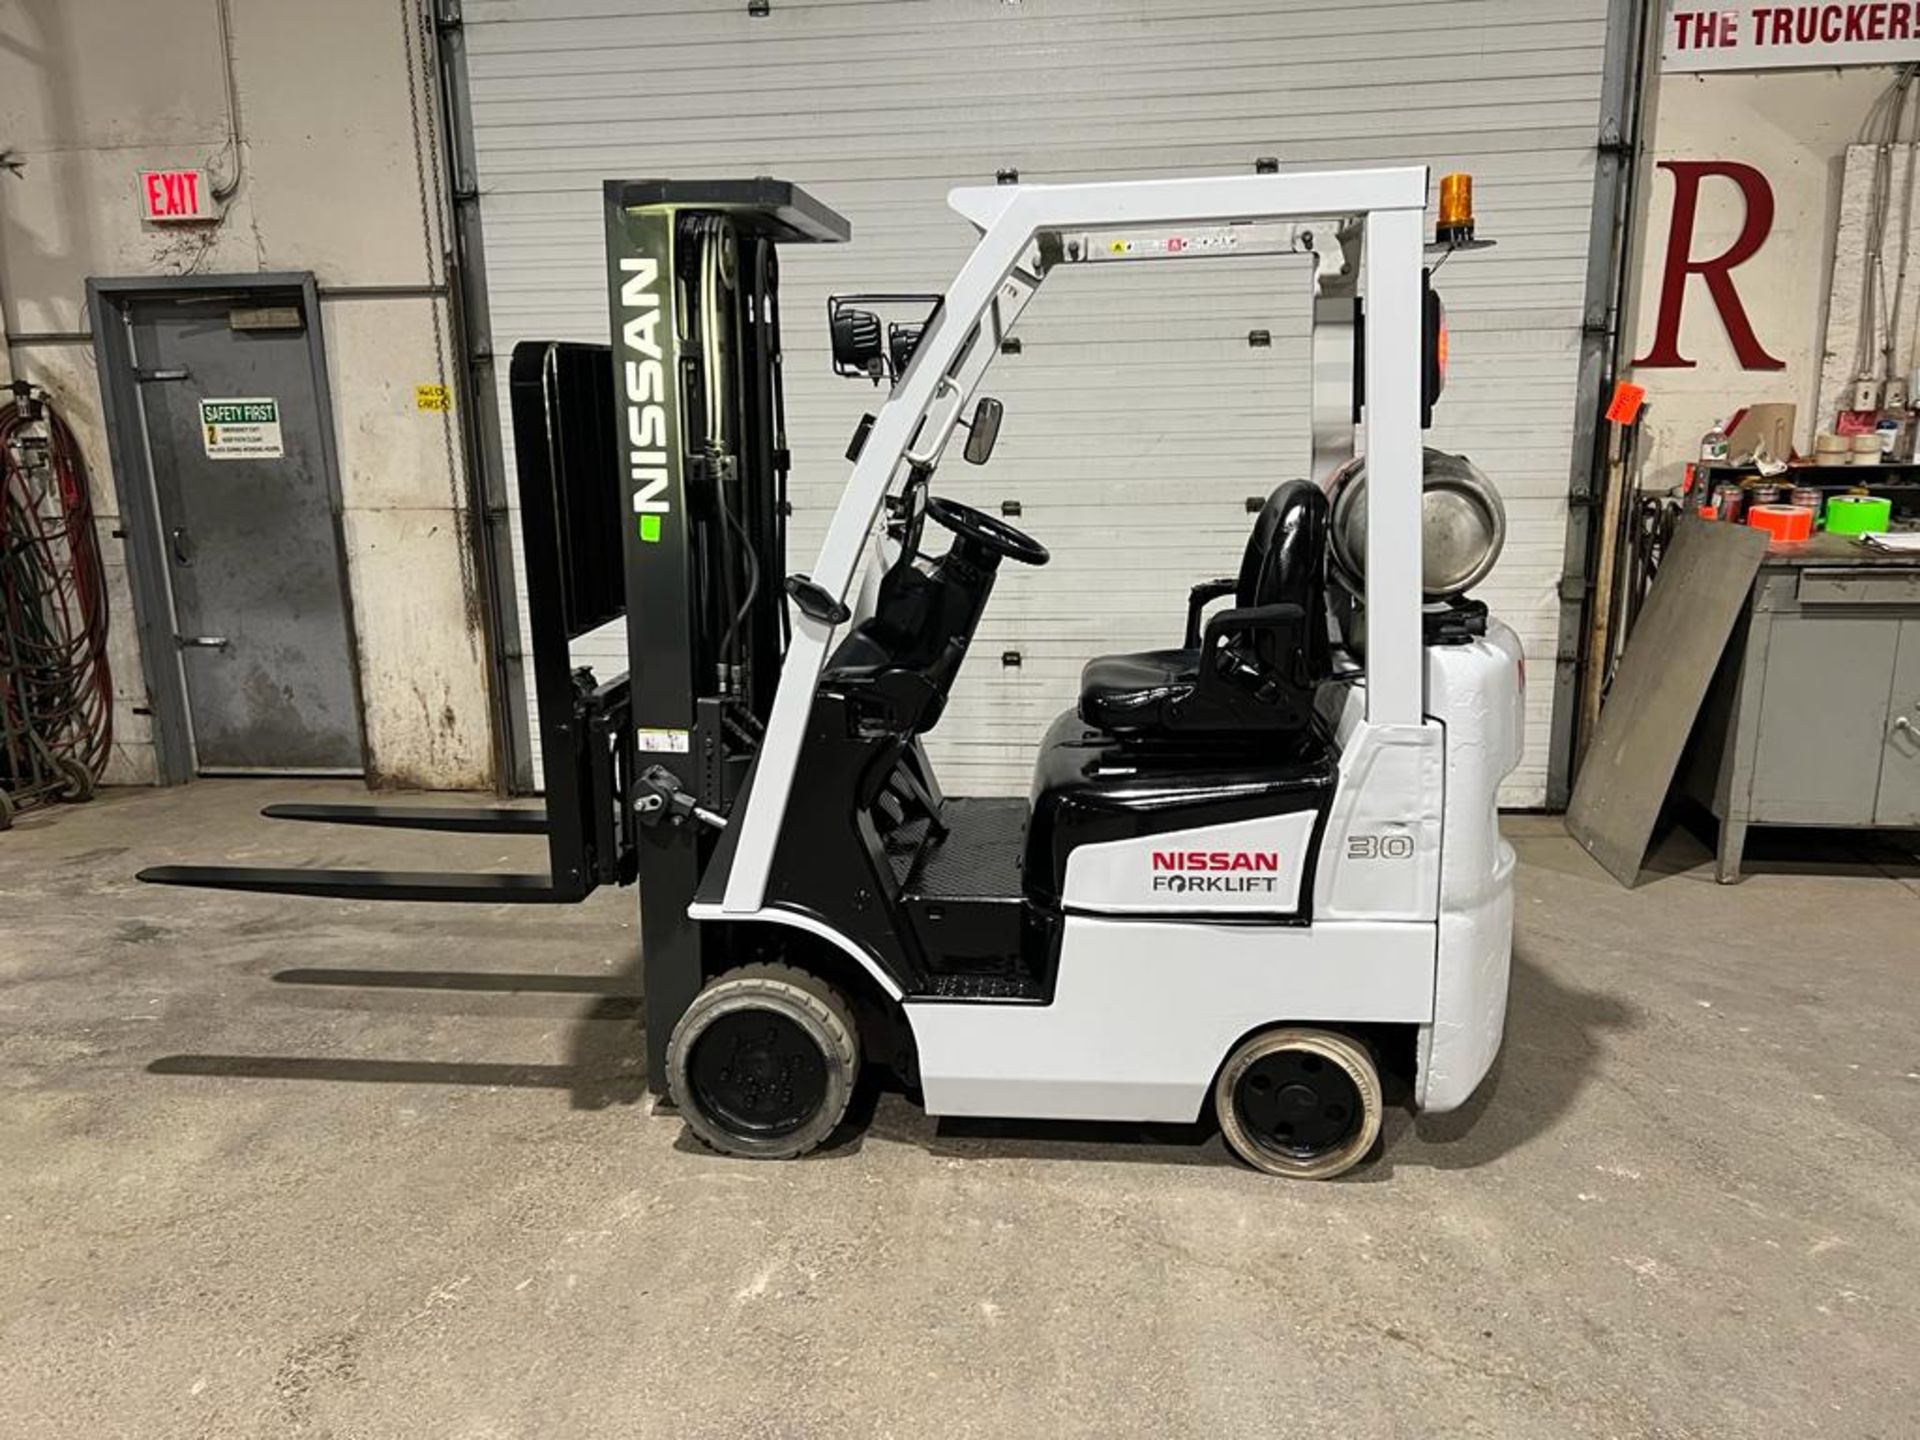 Nissan 3,000lbs Capacity Forklift with Sideshift LPG (propane) with 3-stage mast & 48" forks- FREE